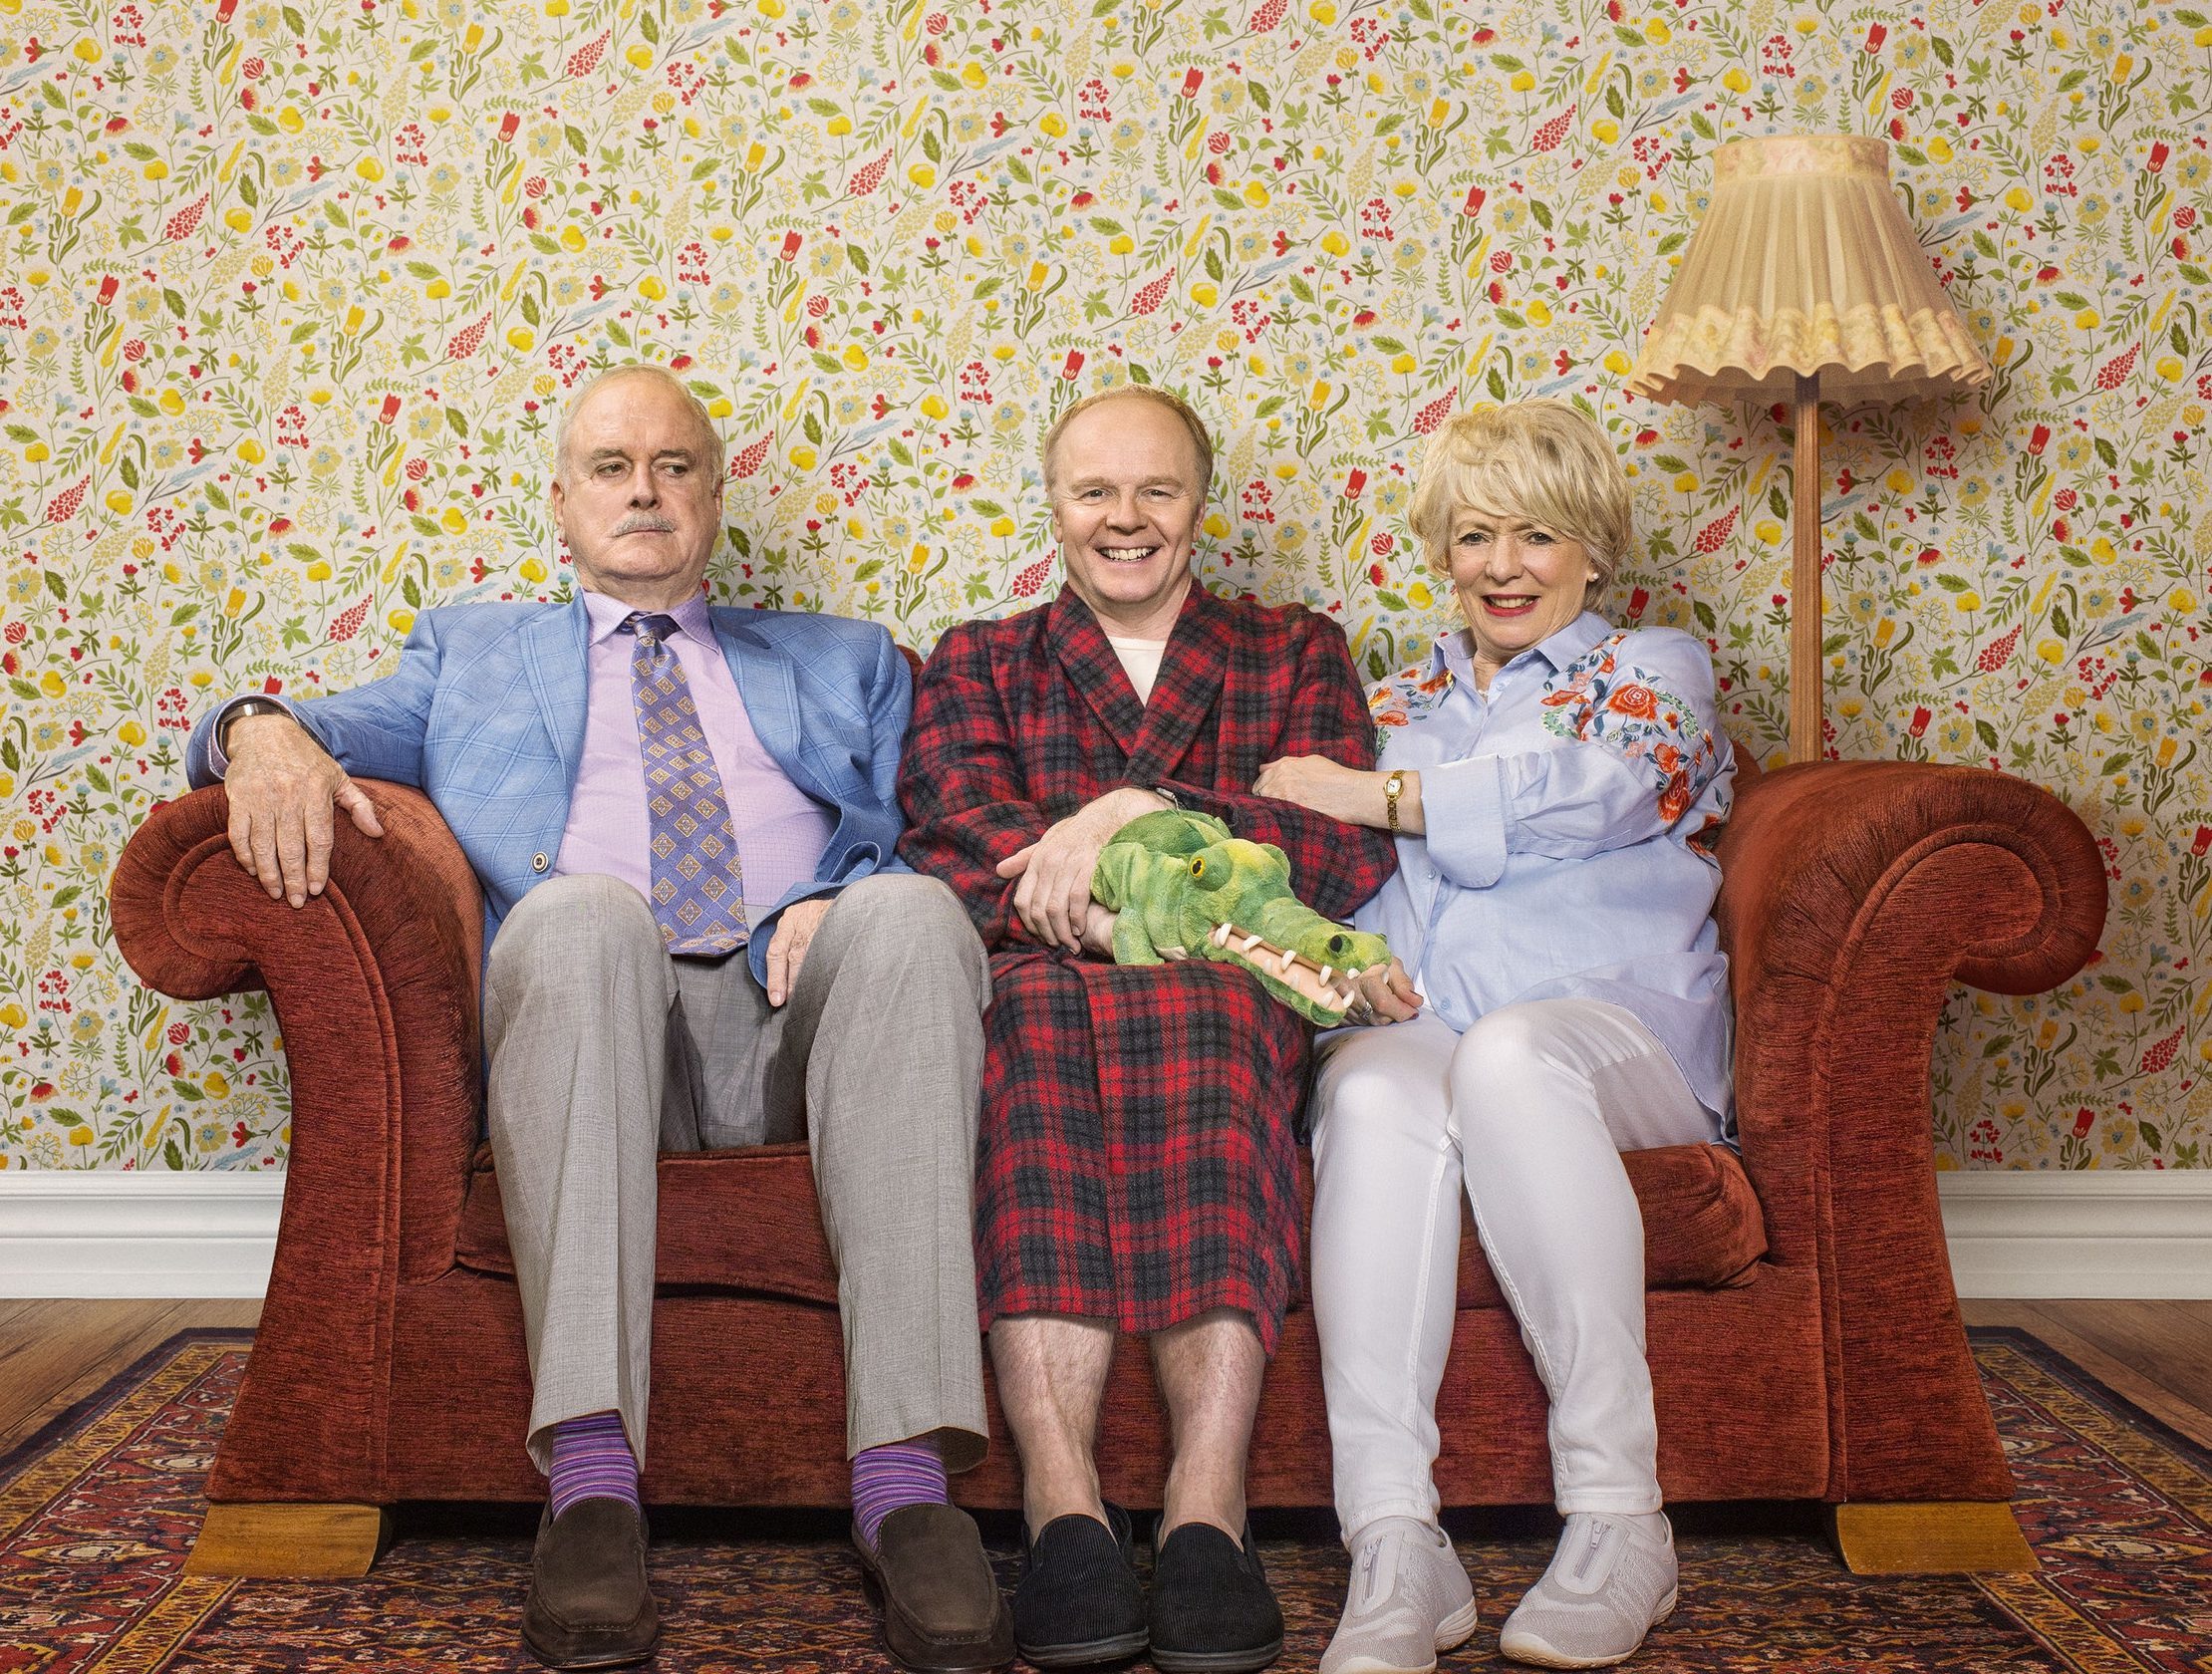 John Cleese: No pressure to compare new sitcom to Fawlty Towers (Adam Lawrence/BBC/Shutterstock)